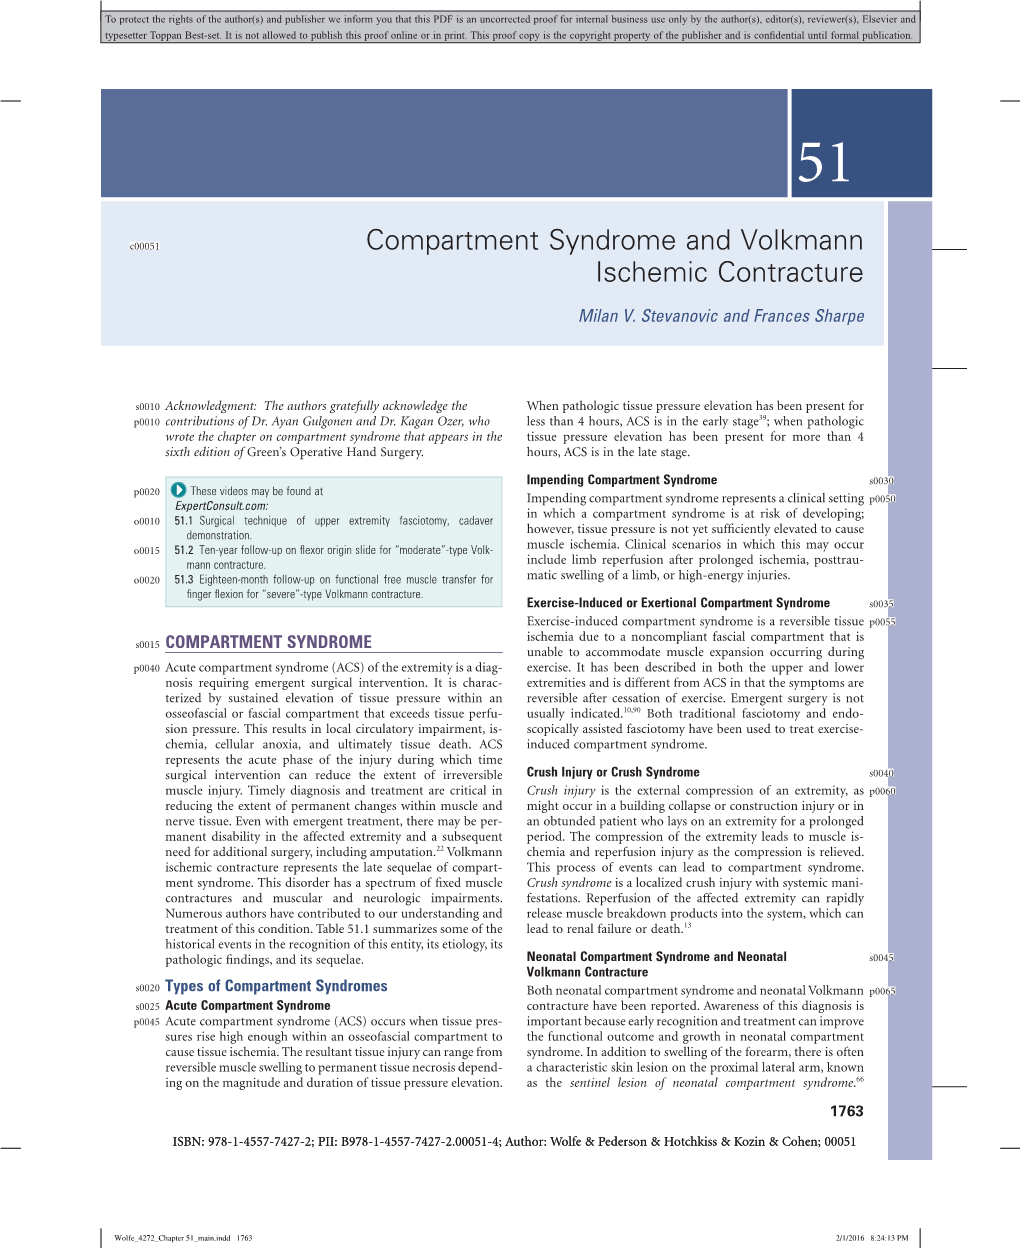 Compartment Syndrome and Volkmann Ischemic Contracture